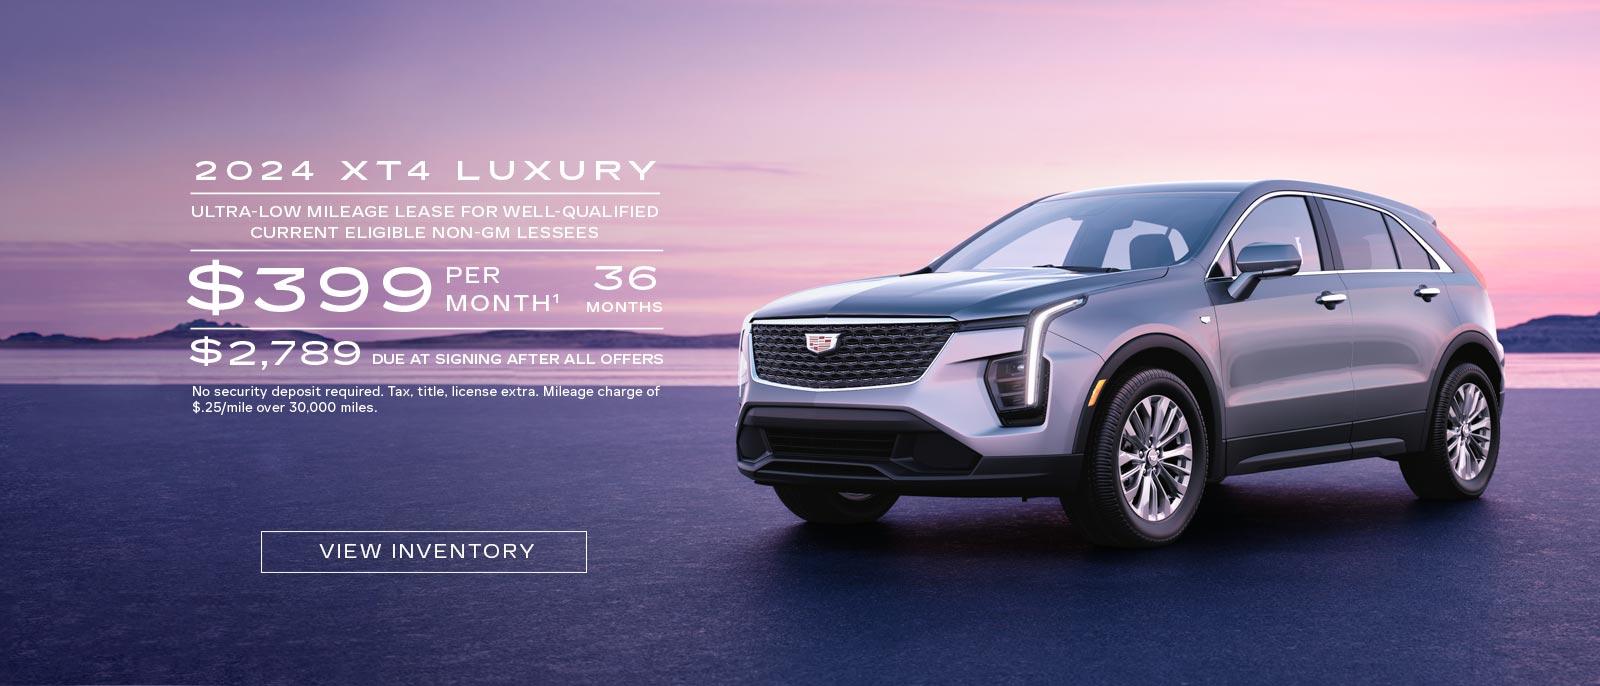 2024 XT4 Luxury. Ultra-low mileage lease for well-qualified current eligible NON-GM lessees. $399 per month. 36 months. $2,789 due at signing after all offers.